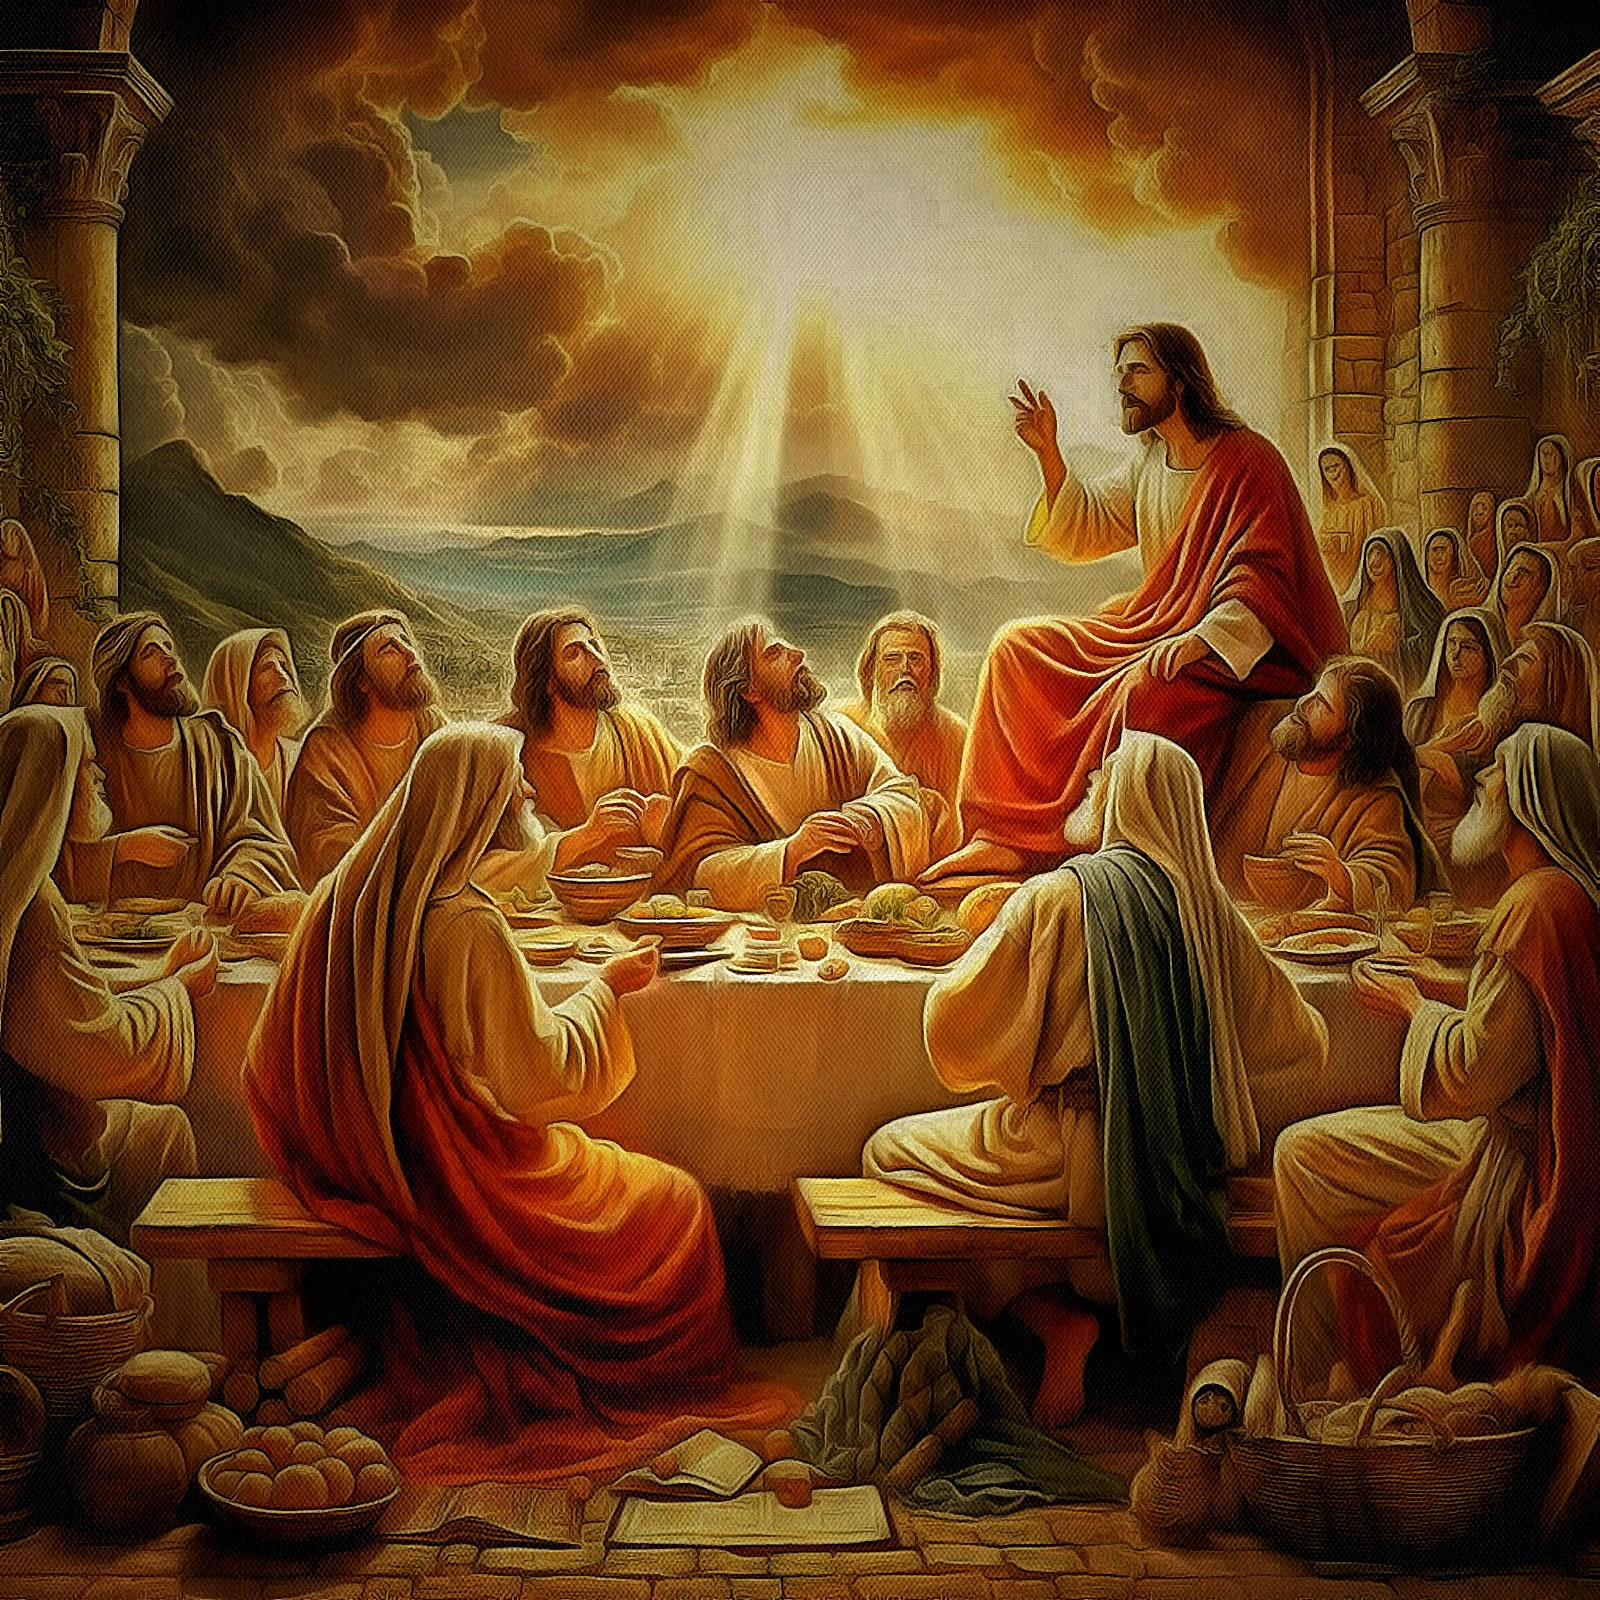 Imaginary Bible Story Scene with Jesus Preaching to his Apostles